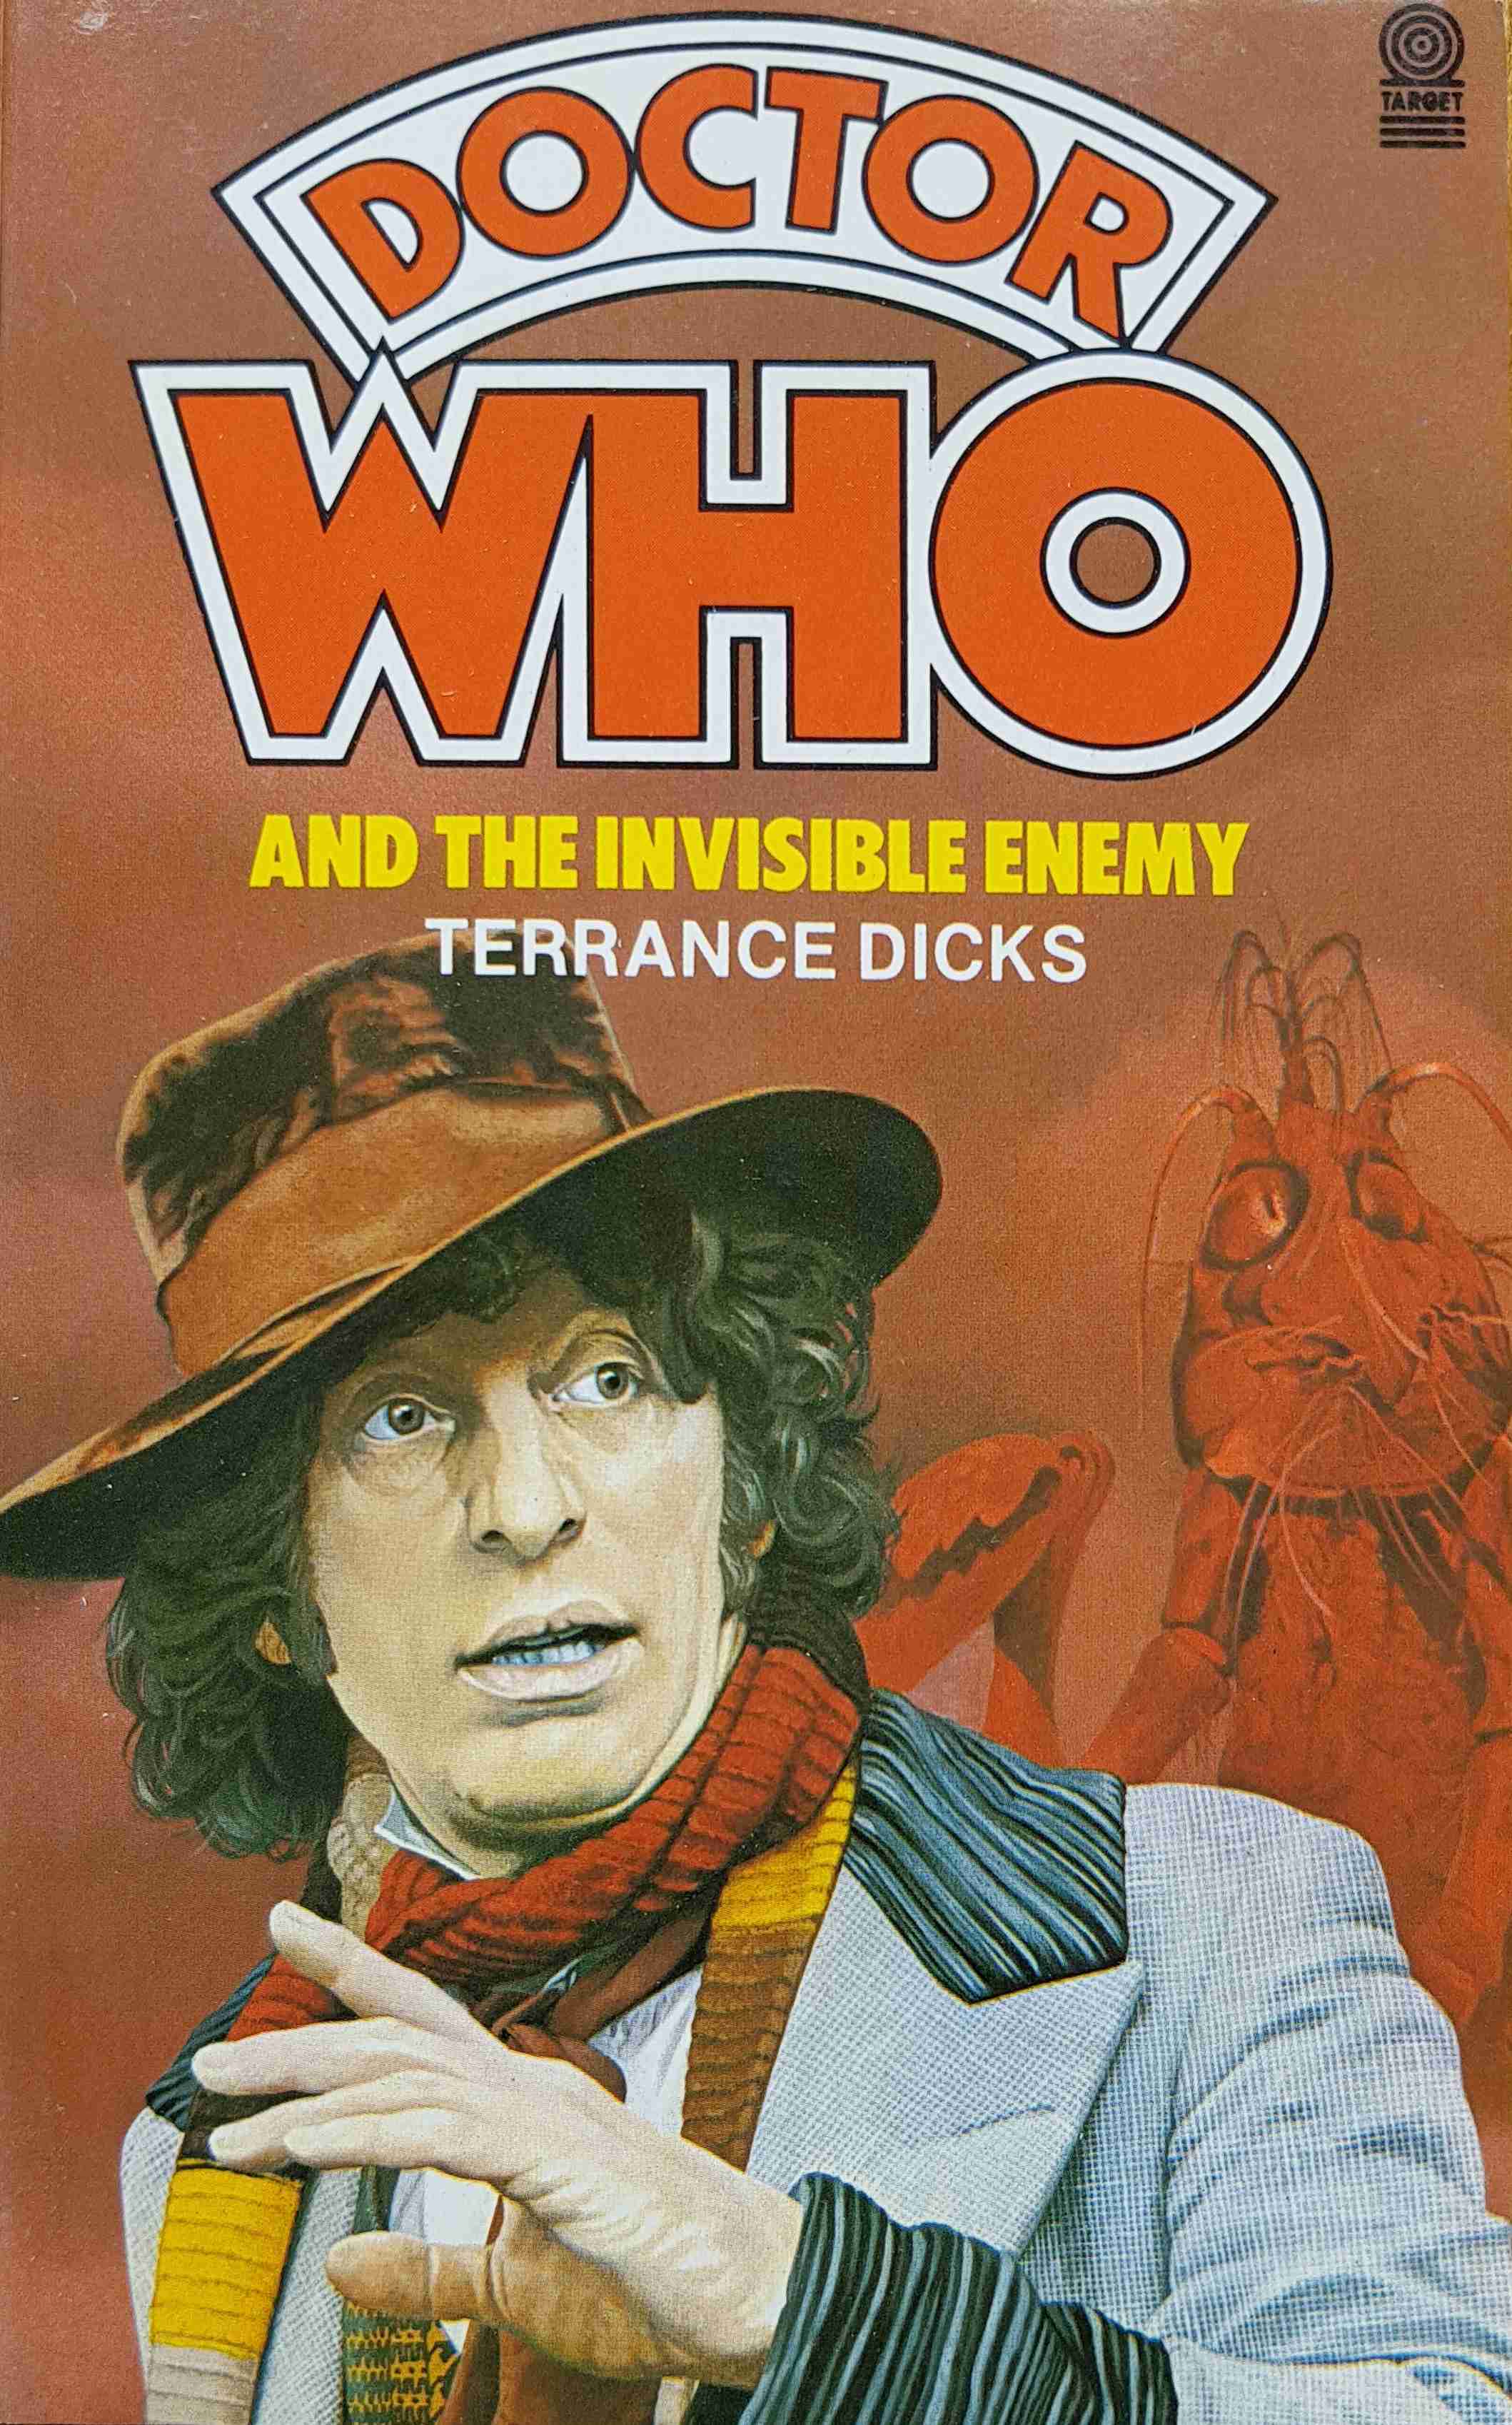 Picture of Doctor Who - The invisible enemy by artist Terrance Dicks from the BBC books - Records and Tapes library